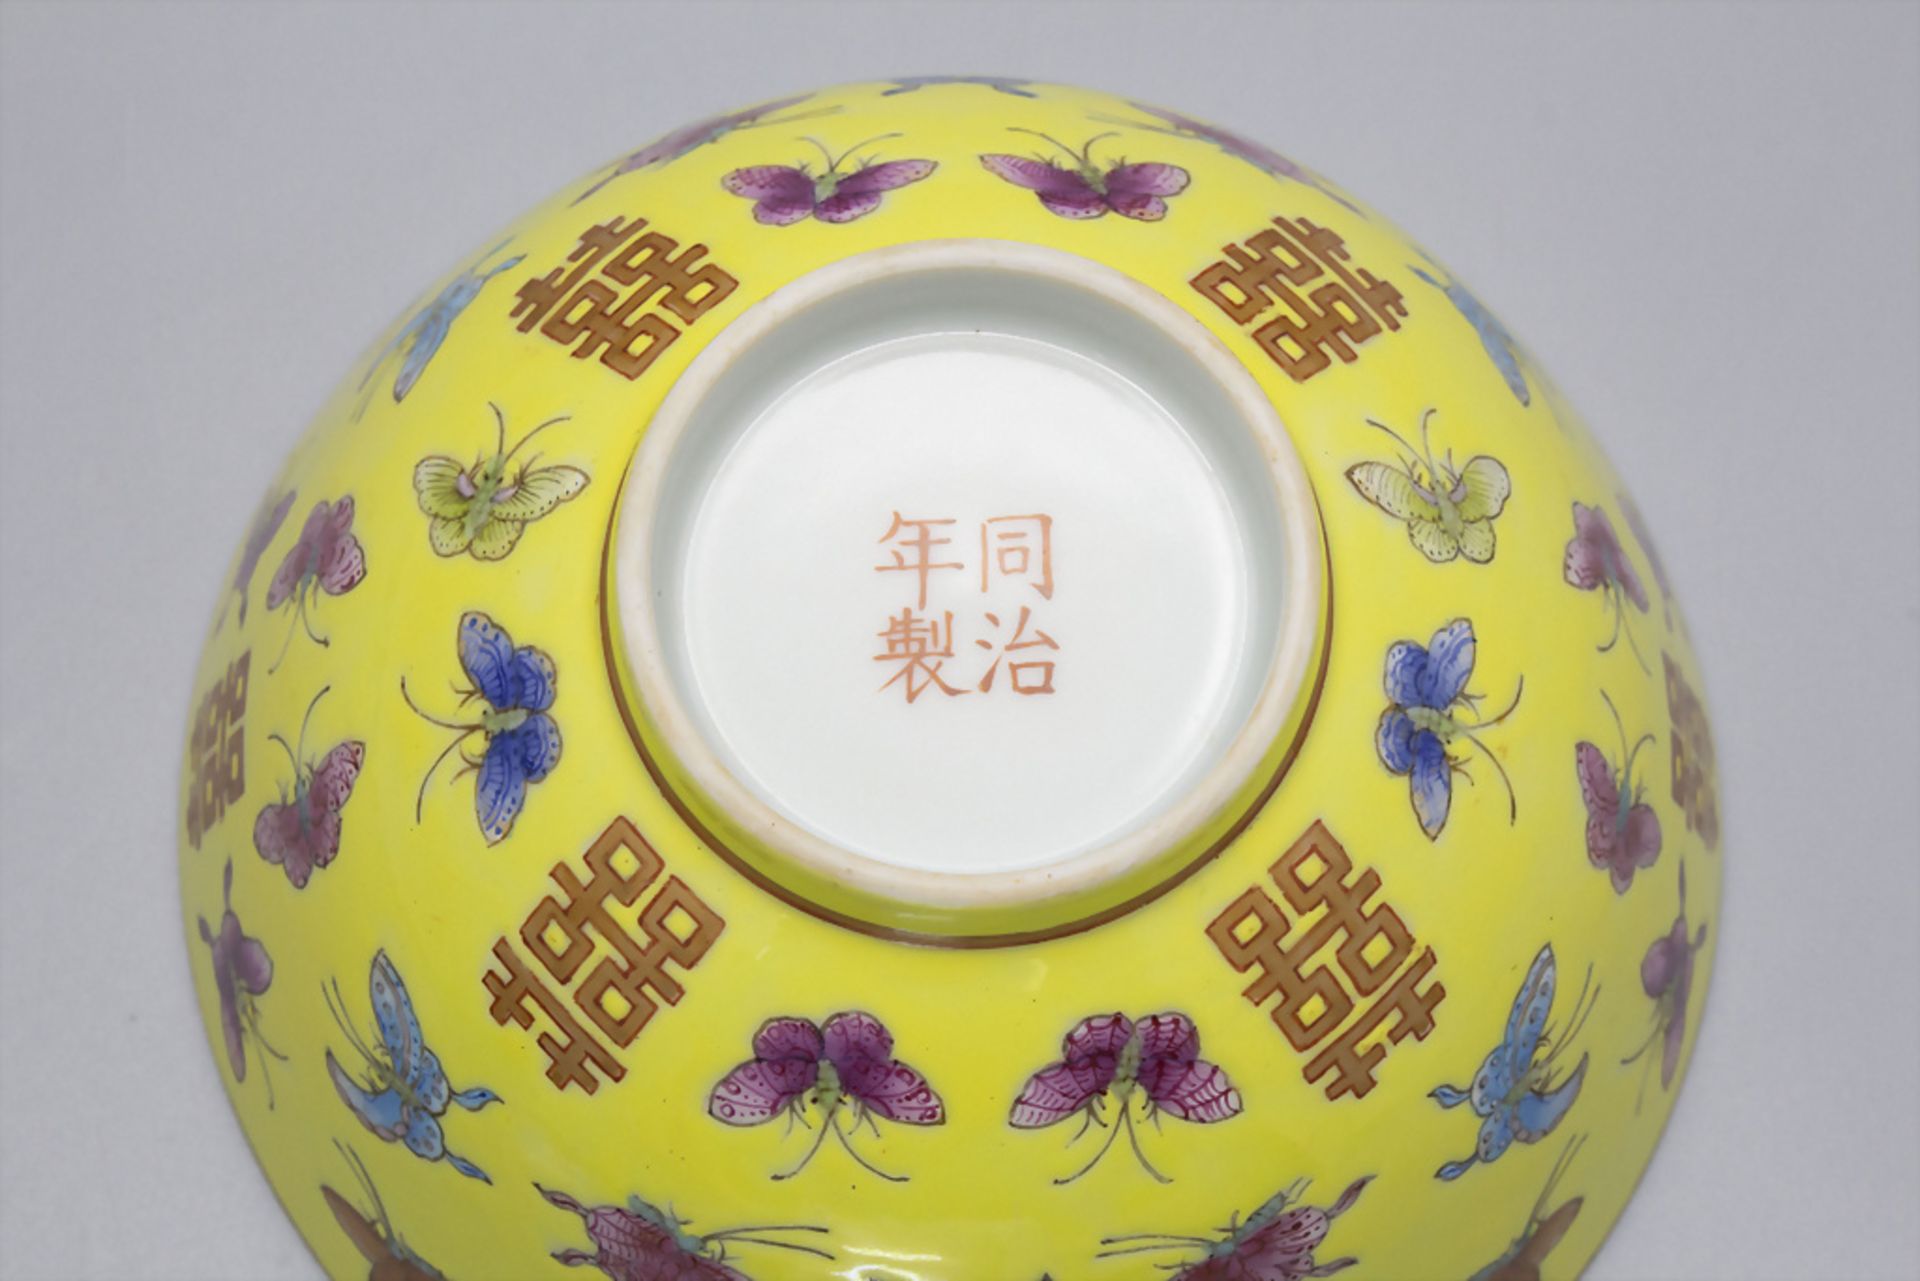 Gelbe Schale mit Schmetterlingsdekor / A yellow bowl with butterfly decor, China, Qing-Zeit, ... - Image 3 of 3